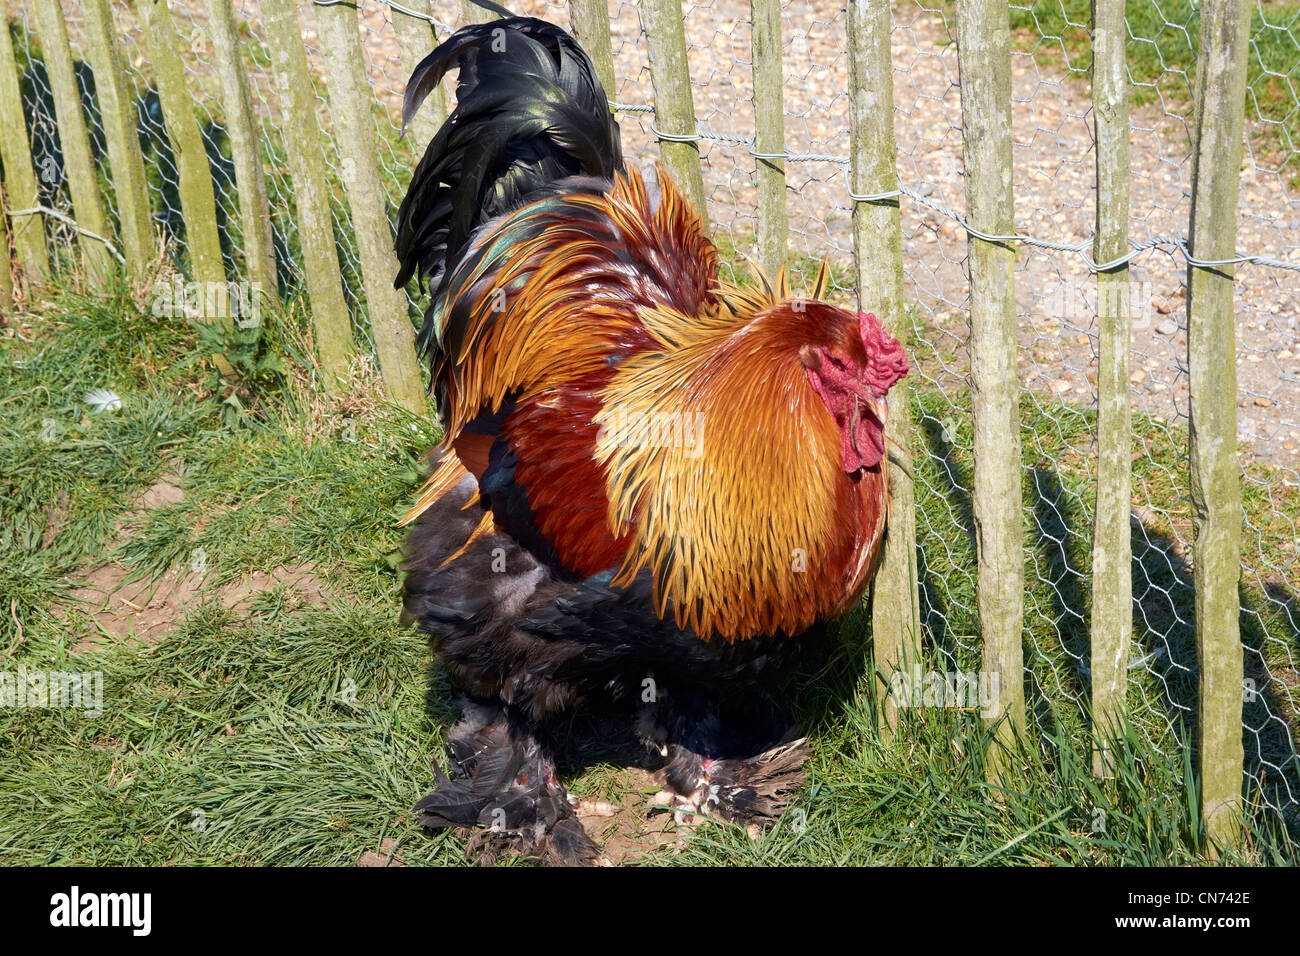 Buff Brahma Rooster - a large but gentle chicken breed suitable